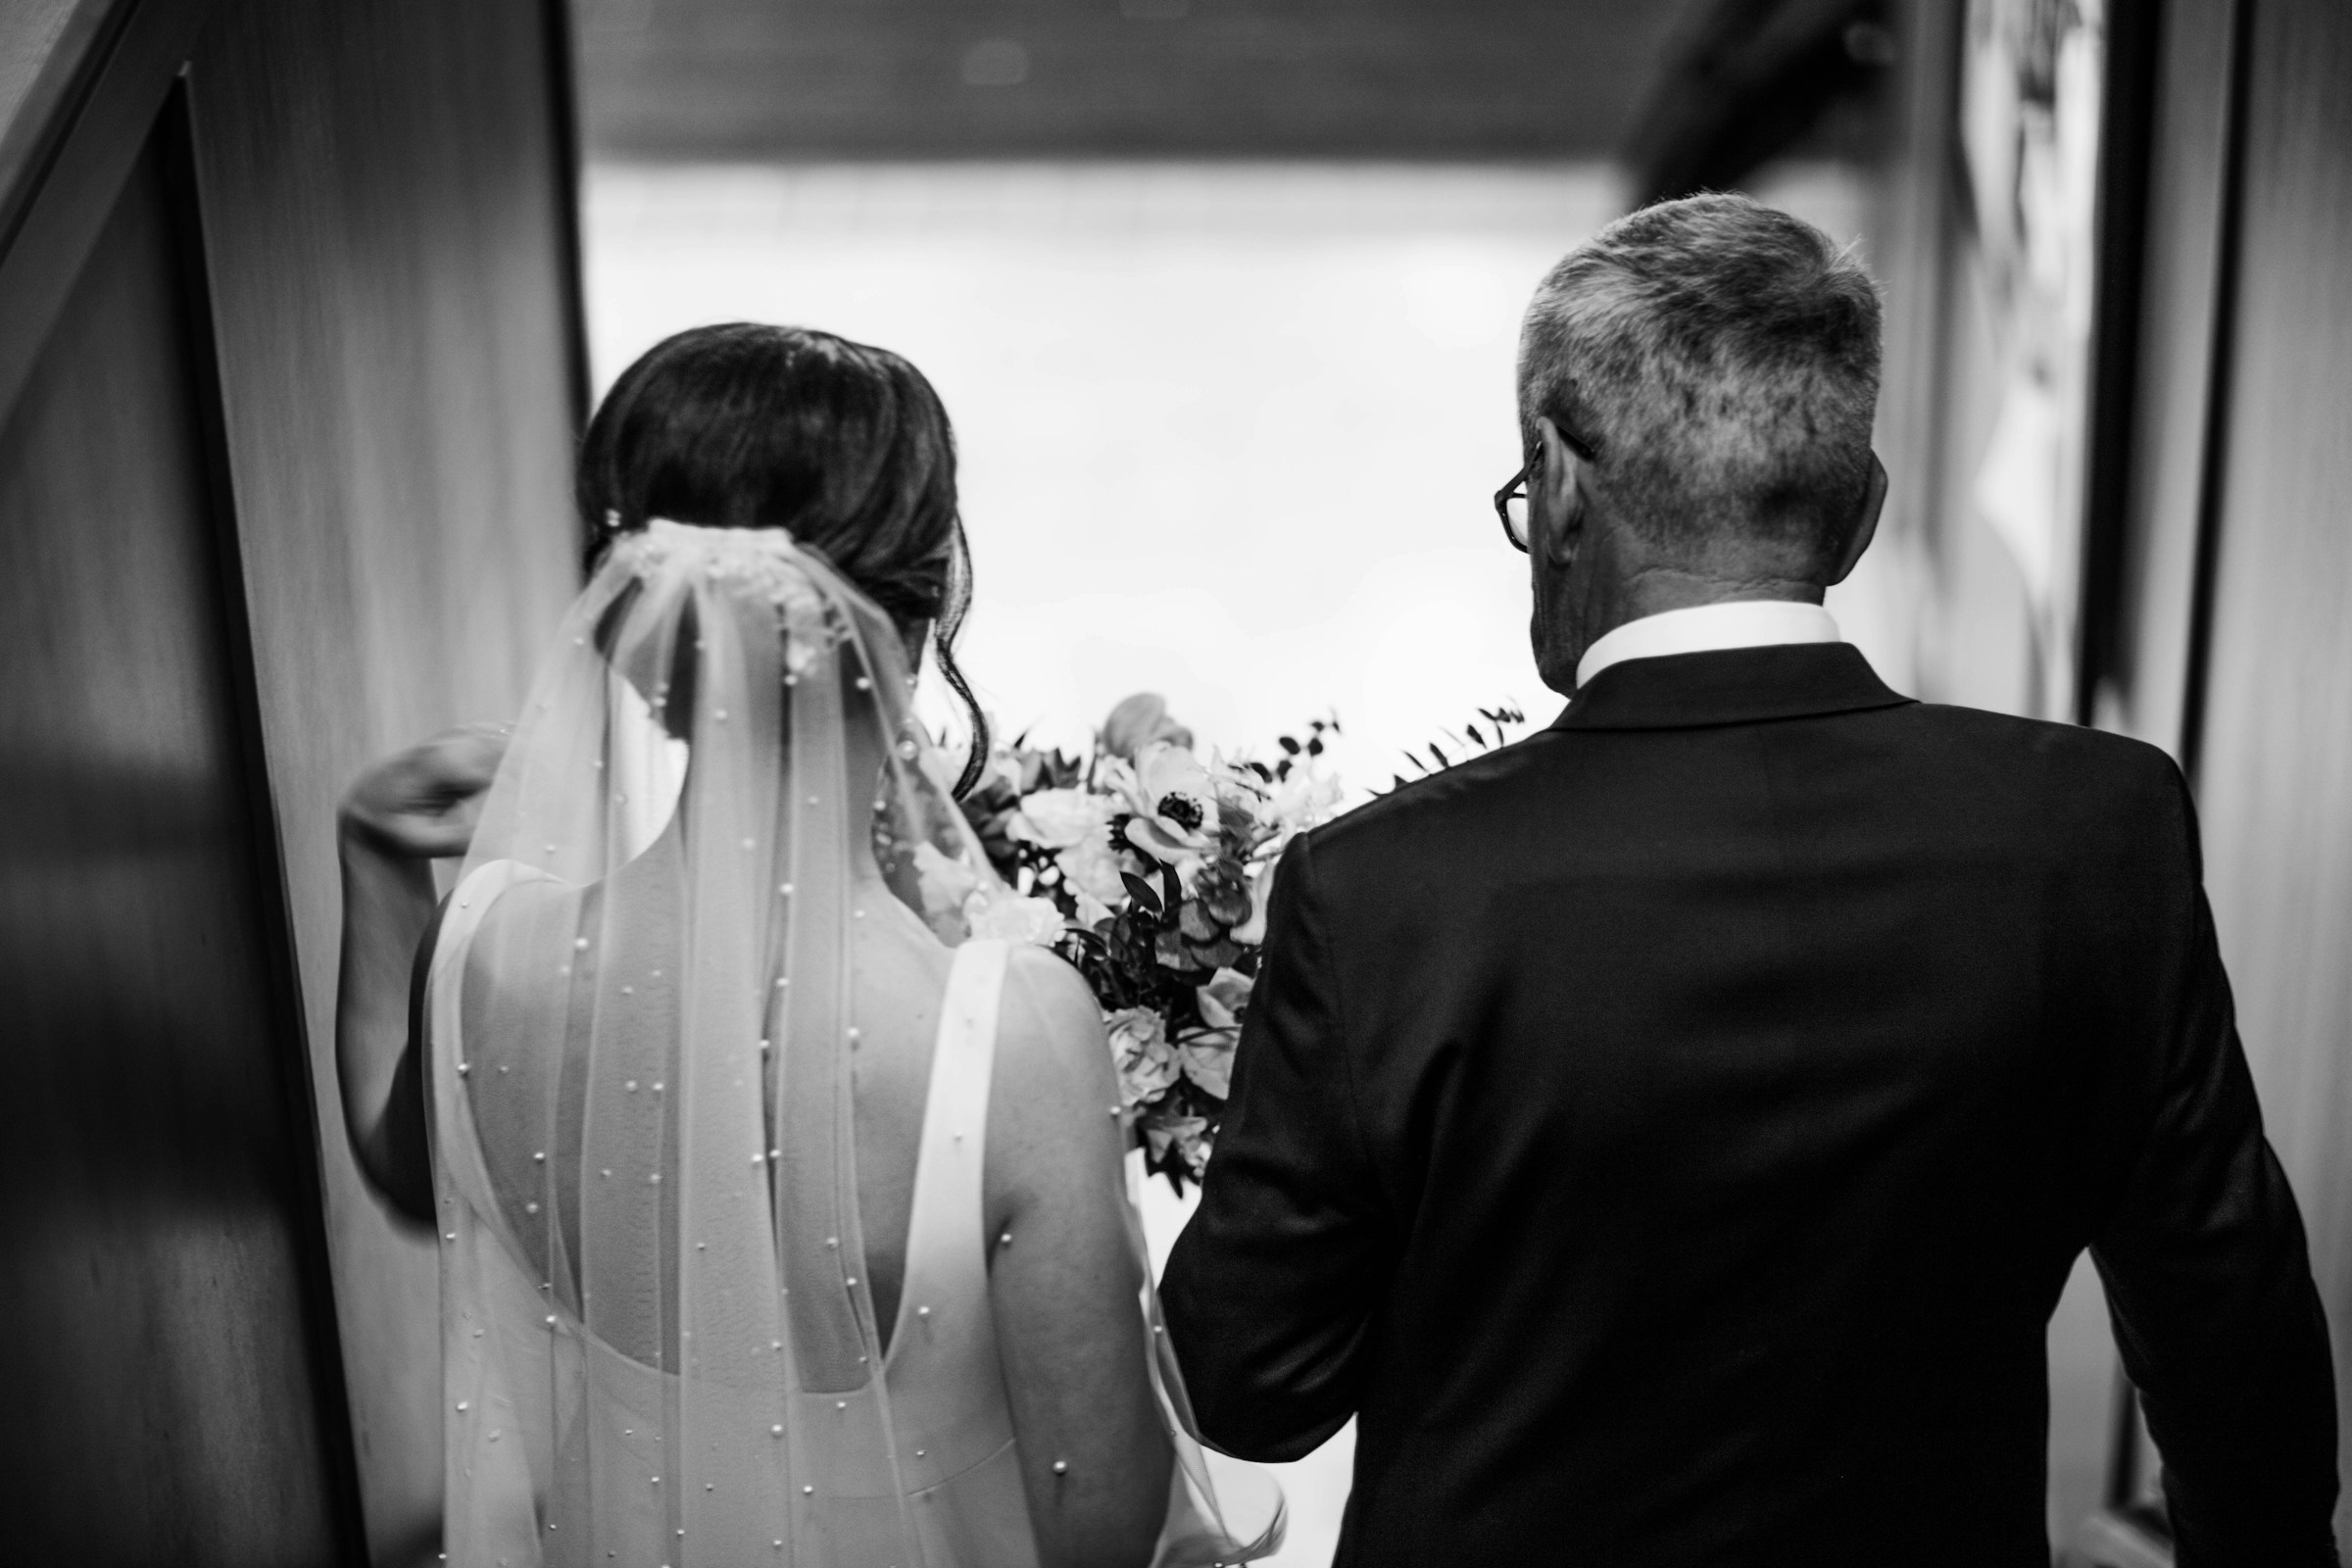 A father and bride walking down a hallway | Source: Unsplash